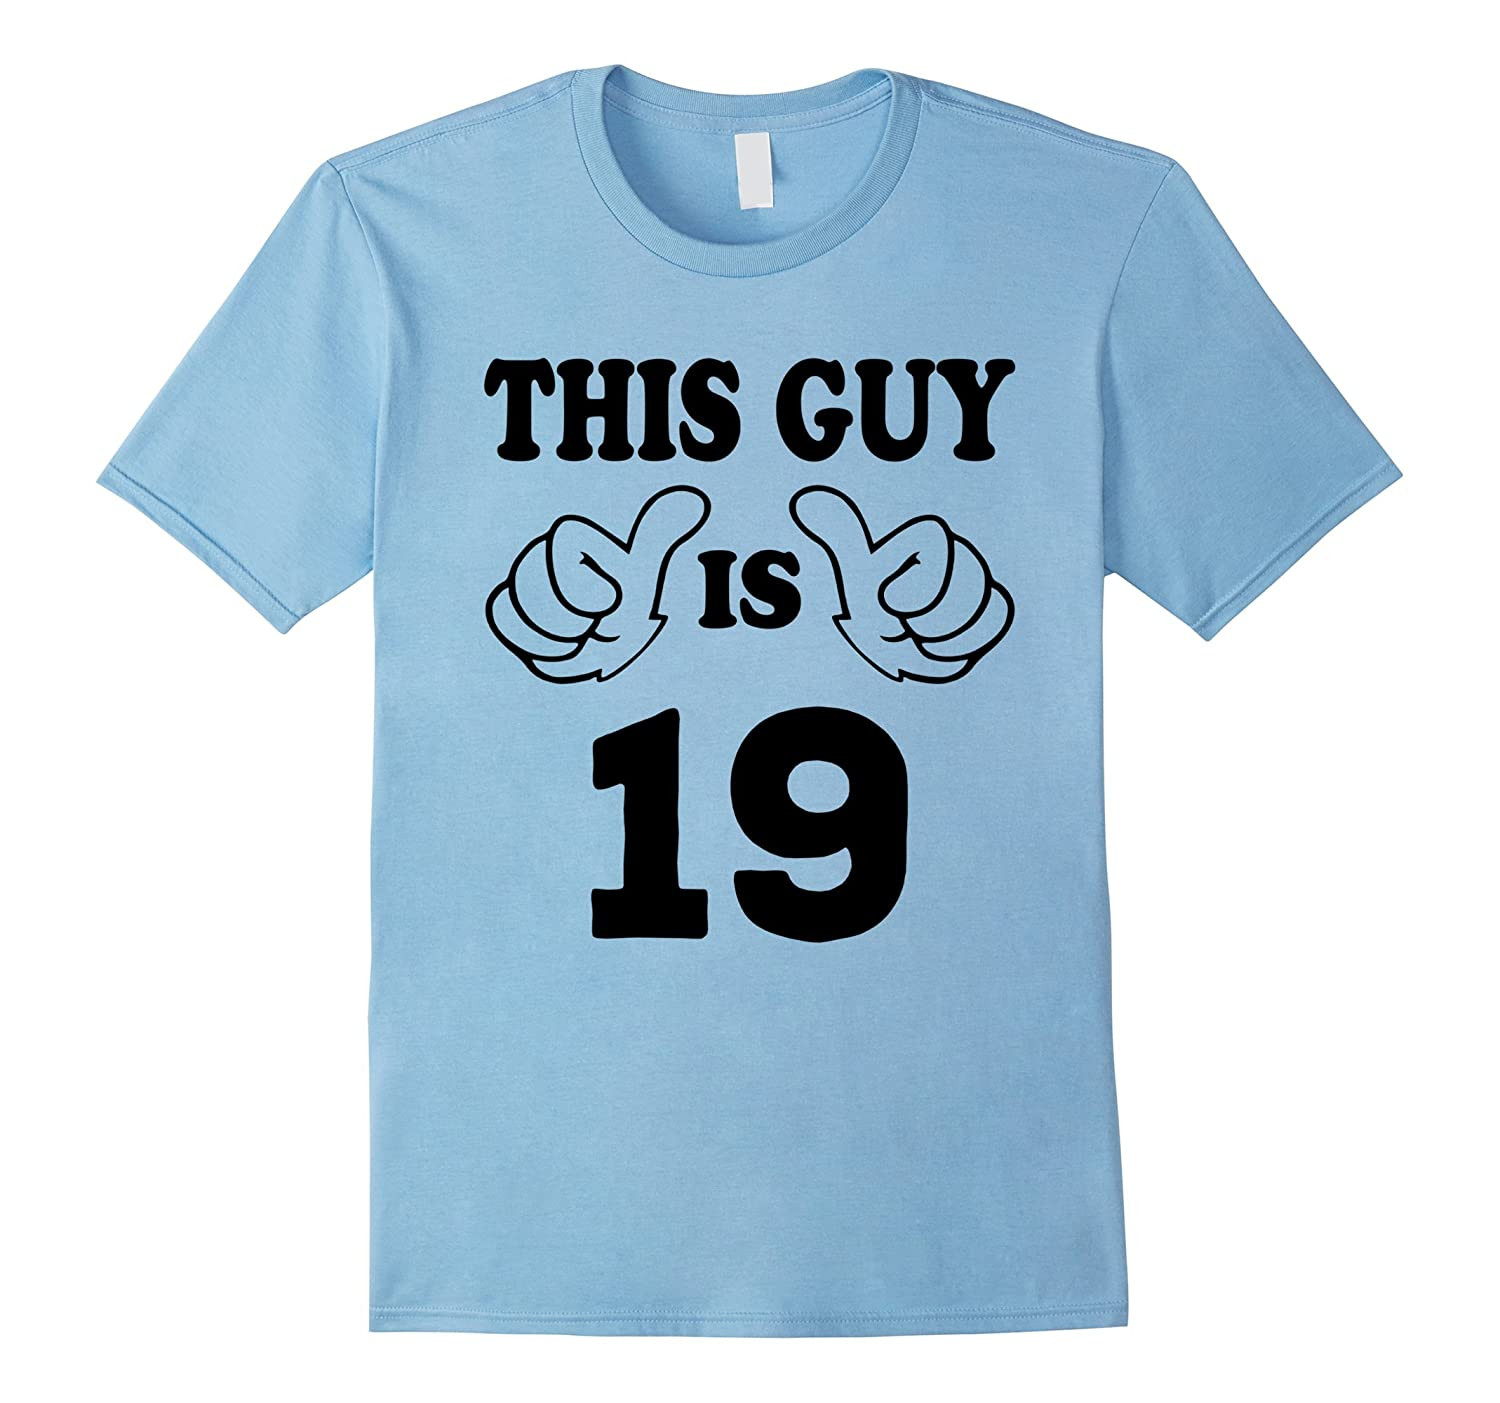 19Th Birthday Gift Ideas
 This Guy is nineteen 19 Years Old 19th Birthday Gift Ideas